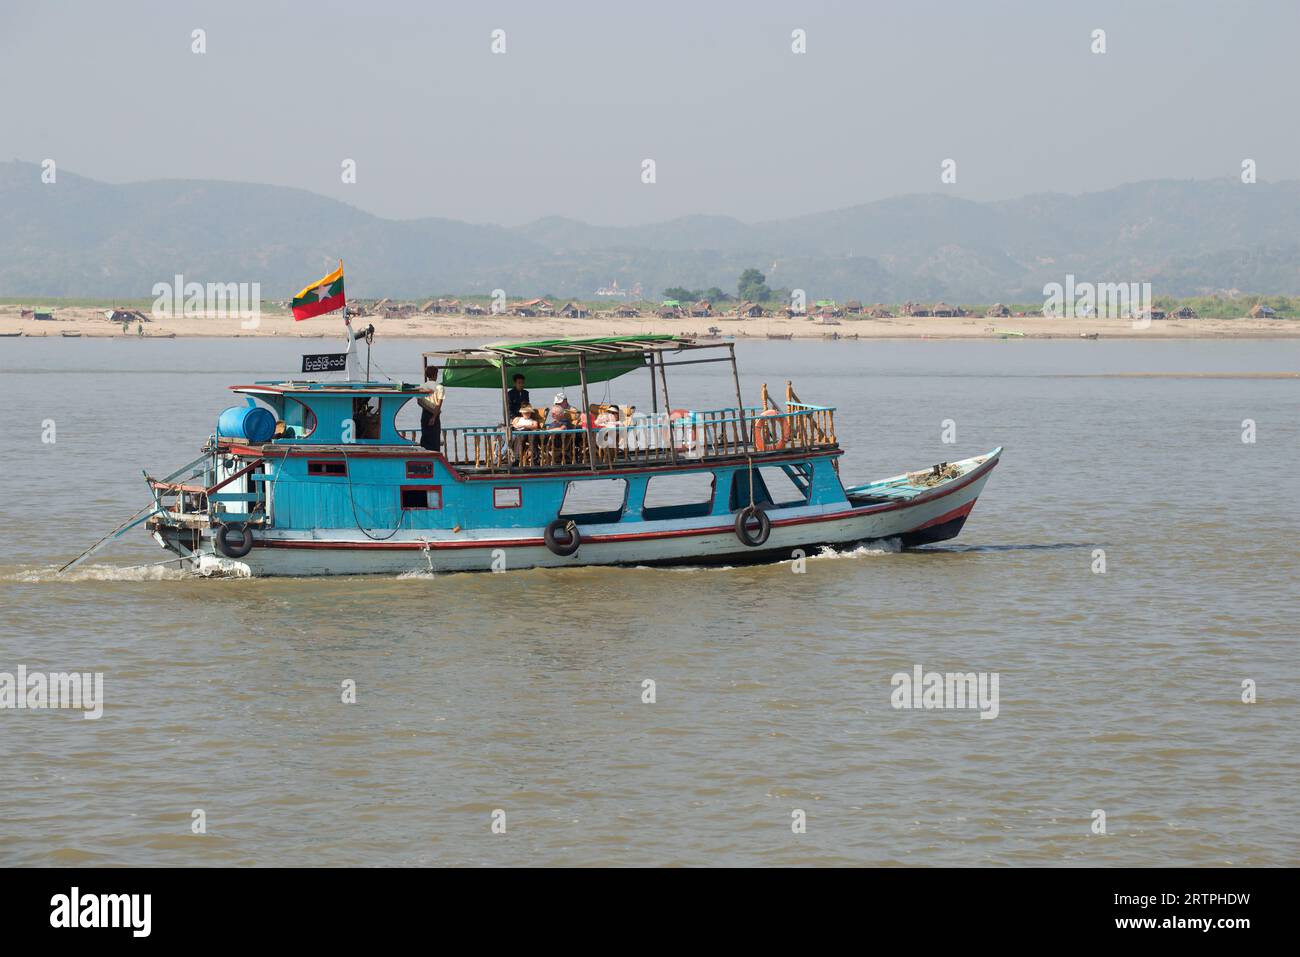 MANDALAI, MYANMA - DECEMBER 21, 2016: Boat with European tourists on a river walk along the Irrawaddy River. Burma Stock Photo